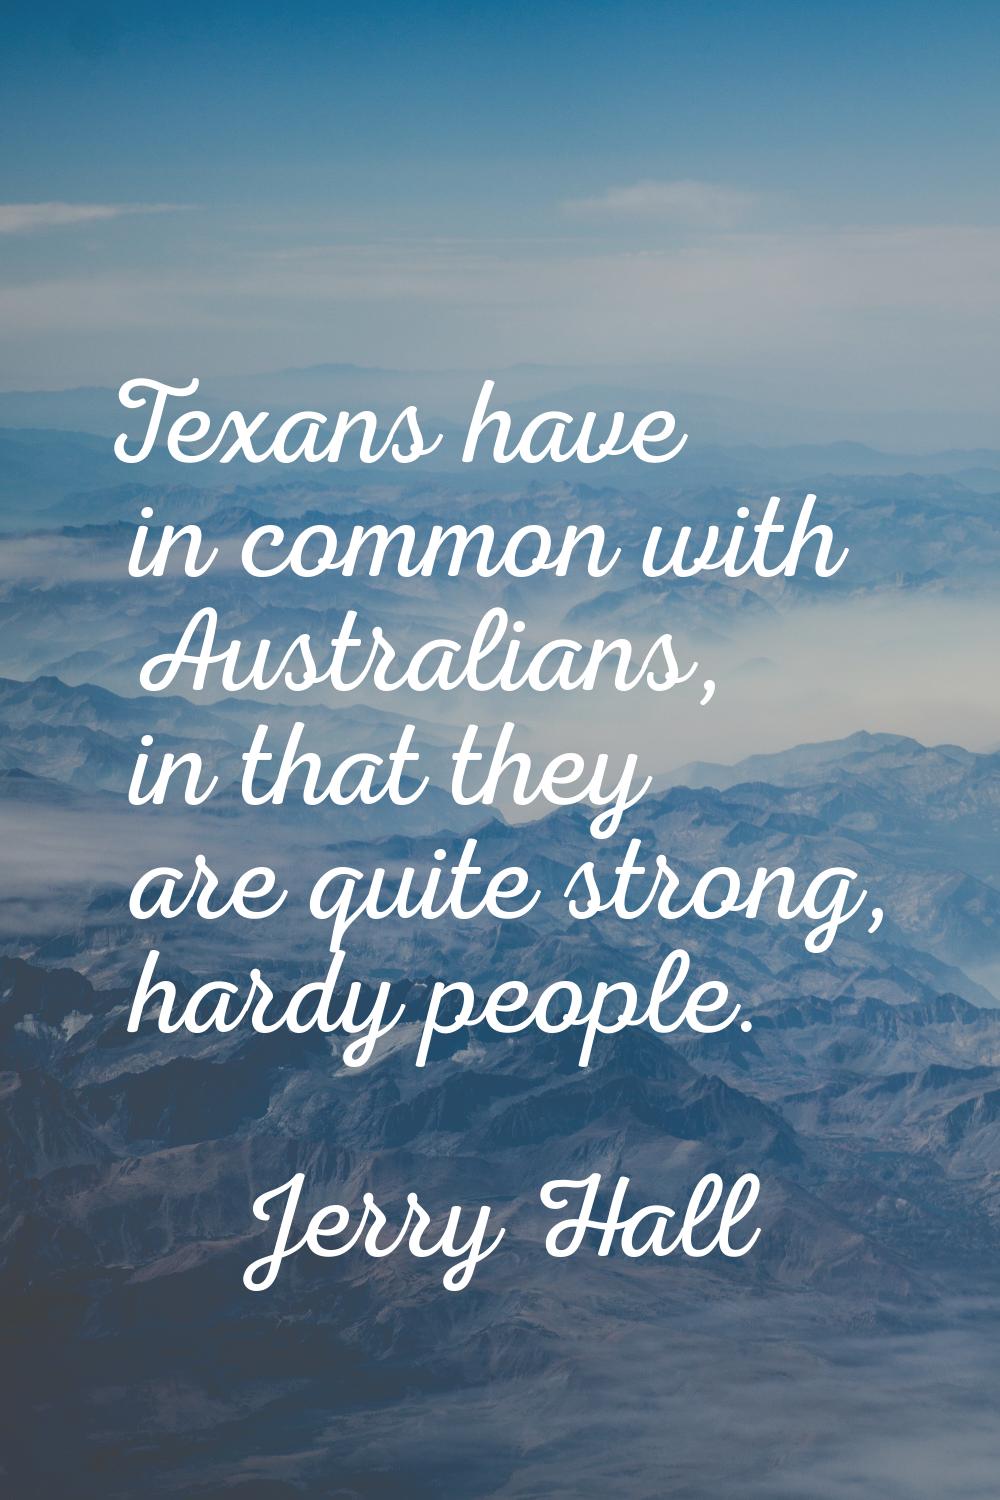 Texans have in common with Australians, in that they are quite strong, hardy people.